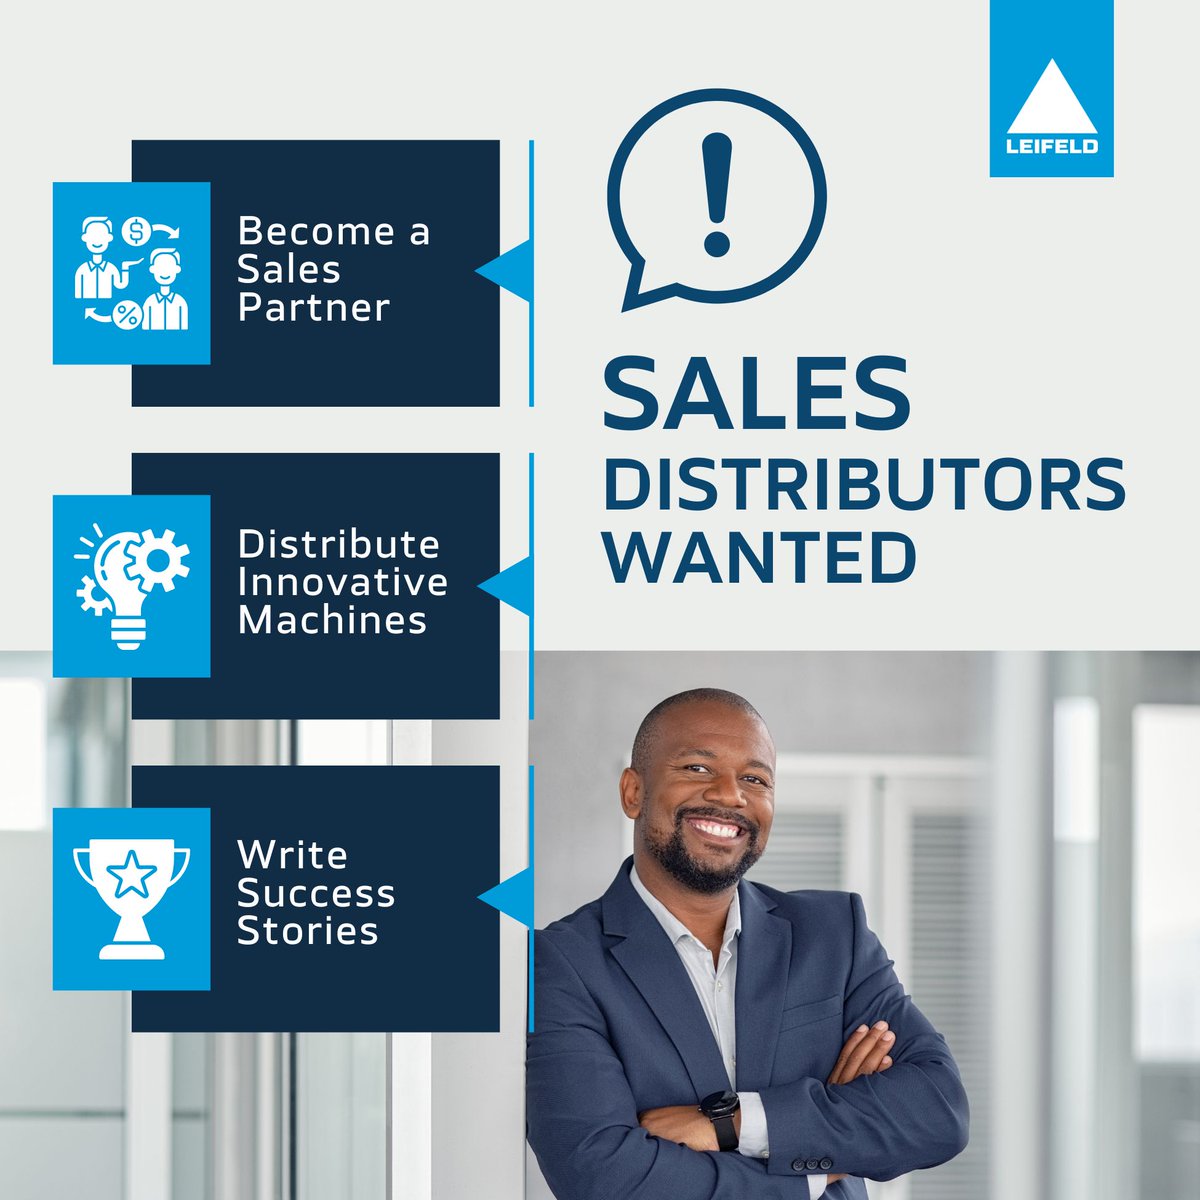 📢 Sales Distributors Wanted! WHERE PASSION MEETS PROFIT Are you passionate about sales and ready to represent cutting-edge technology? We're looking for dynamic individuals or companies to become our sales representatives. Let's get in touch: leifeldms.com/en/contact.html